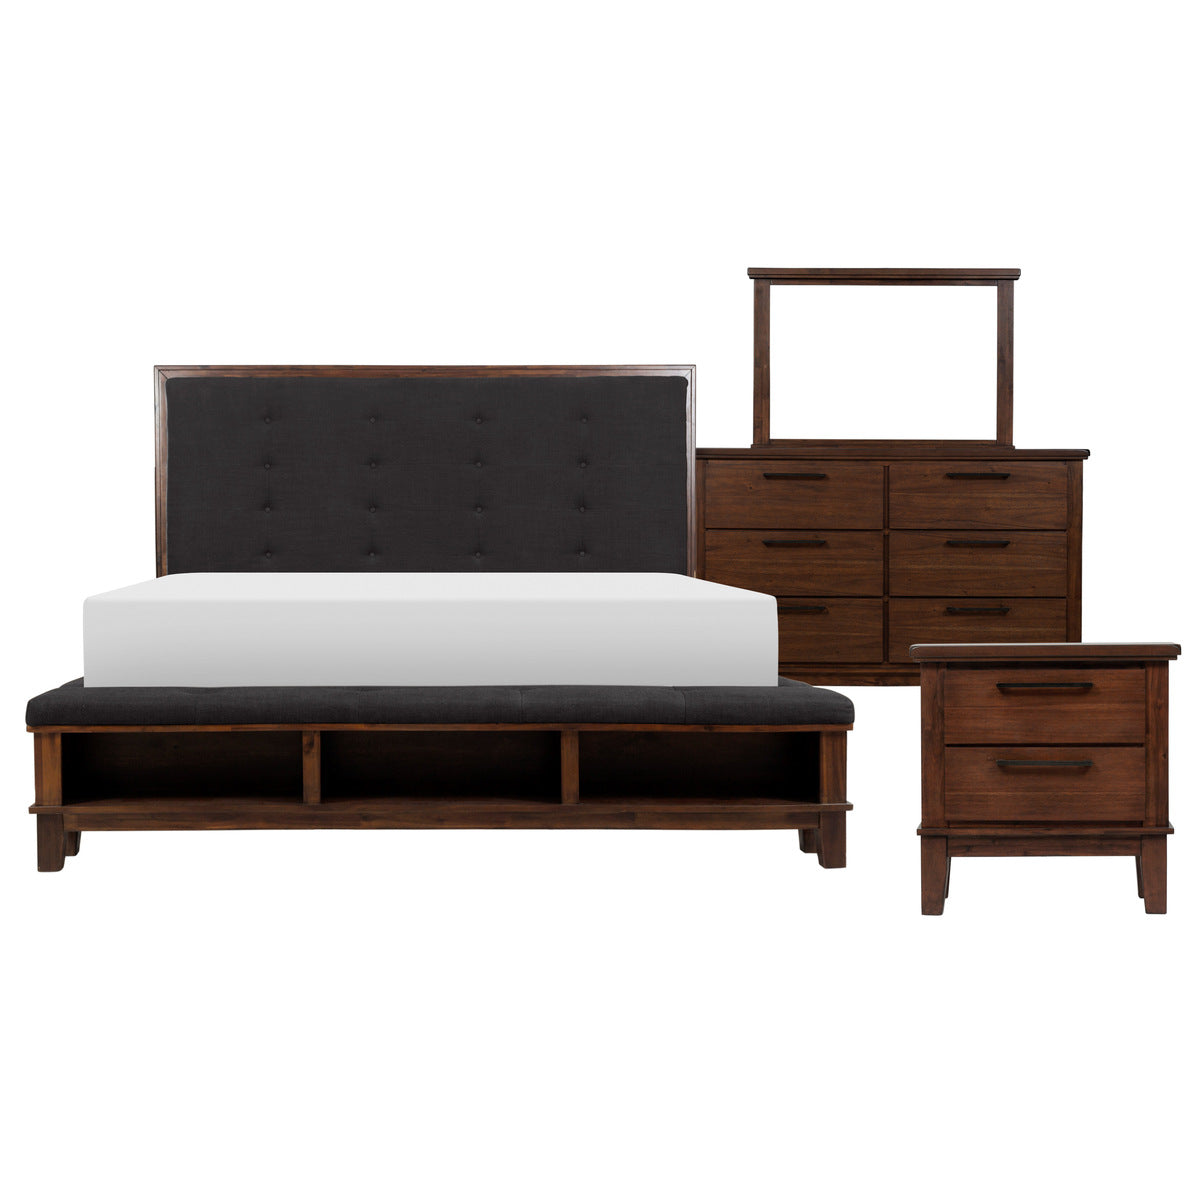 Brown Eastern Modern Traditional Upholstered Tufted Queen Panel Bedroom Set (1Qb,1ns,1dr,1mr)